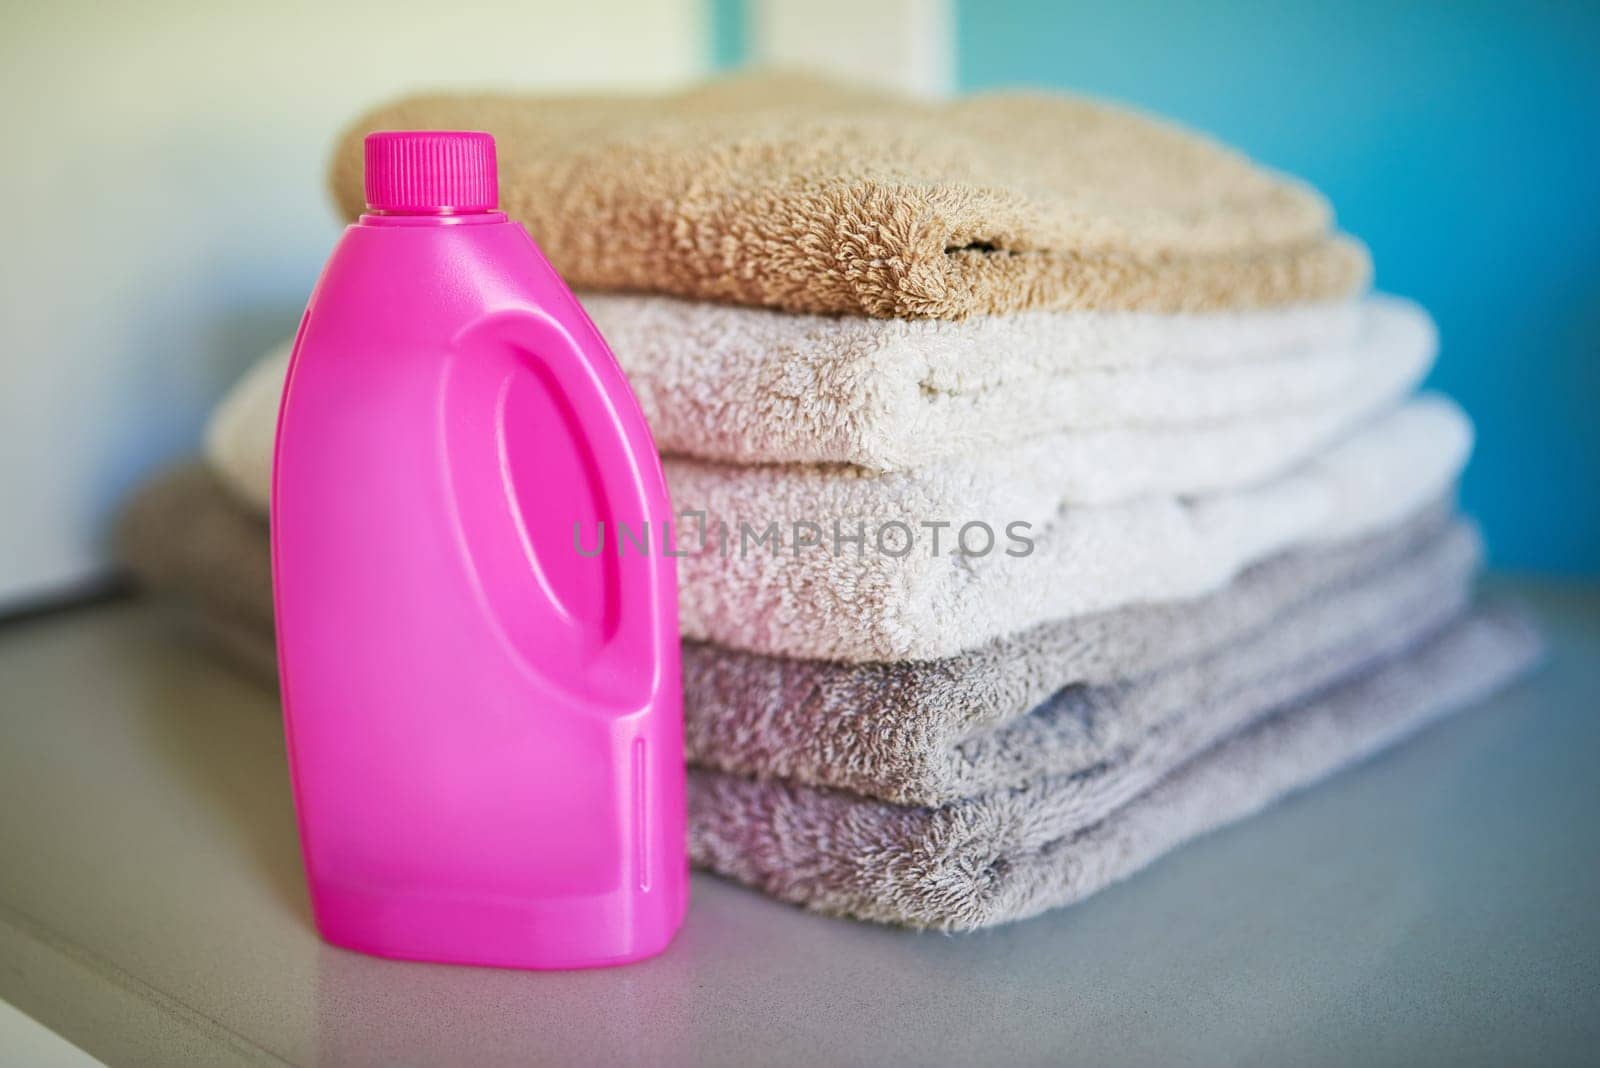 Towels, detergent and washing laundry cleaning or chemical for cotton bacteria, product or household. Cloth, sanitary and folded for neat organizing or linen with soap as service, stack or hygiene by YuriArcurs